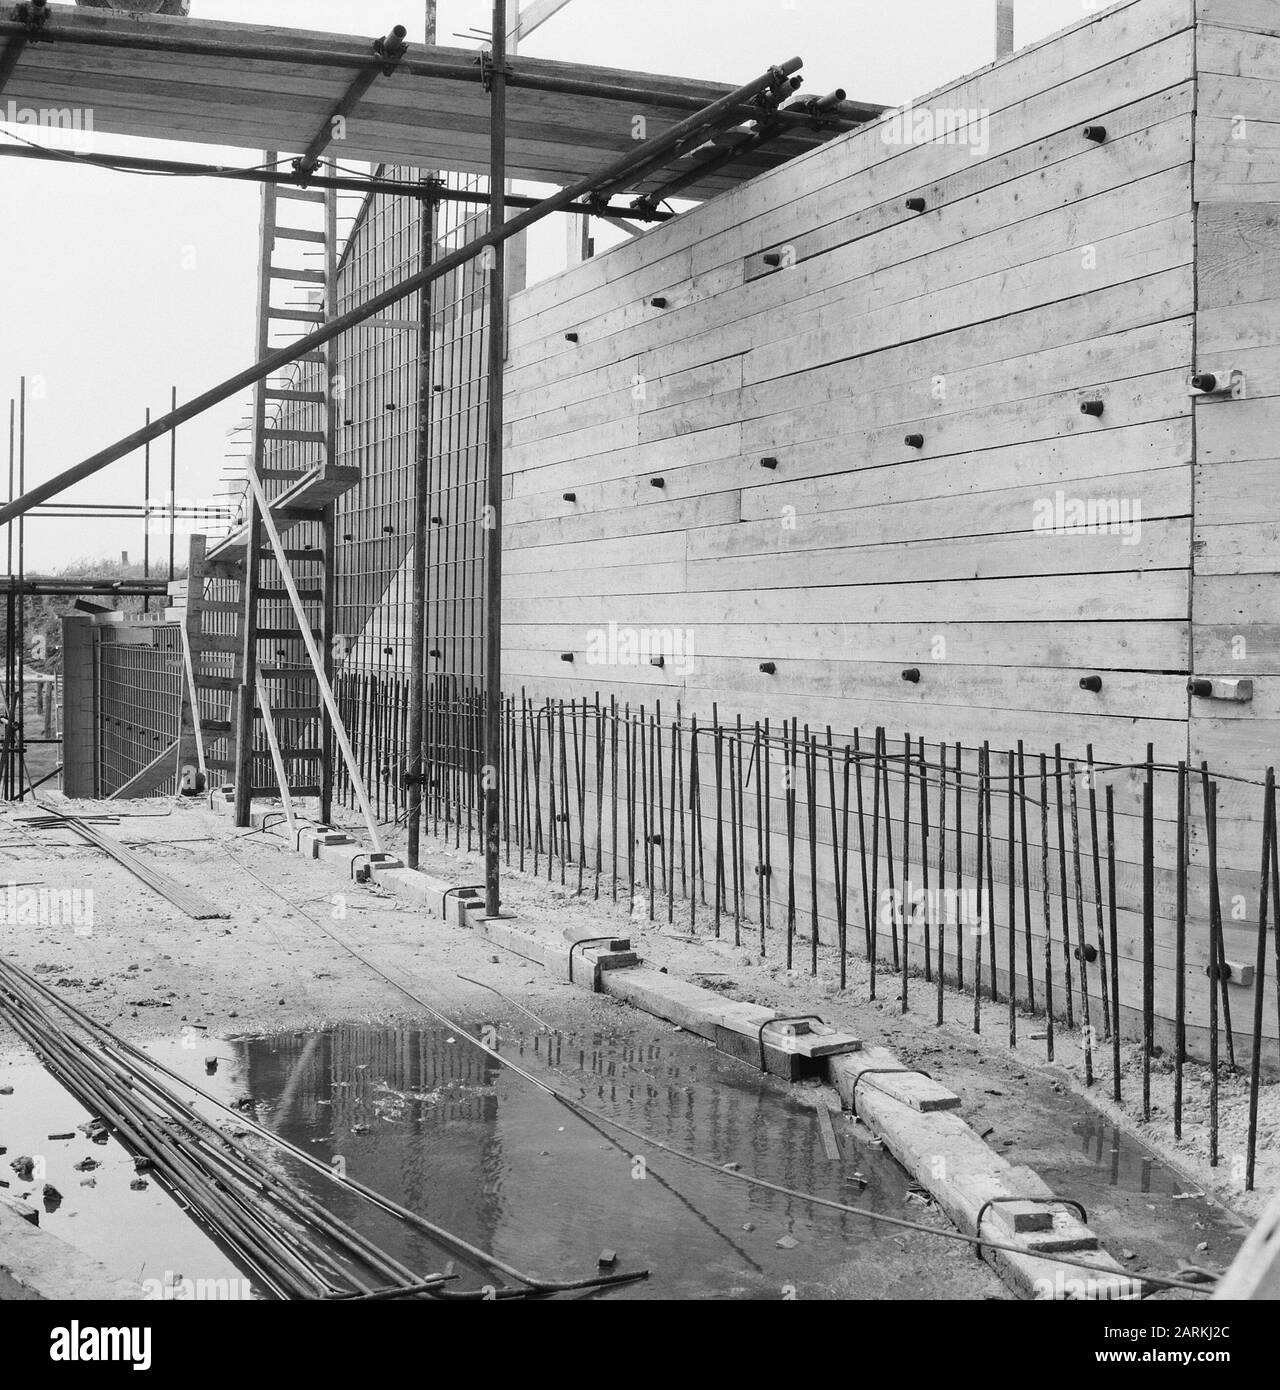 Formwork boards Black and White Stock Photos & Images - Alamy